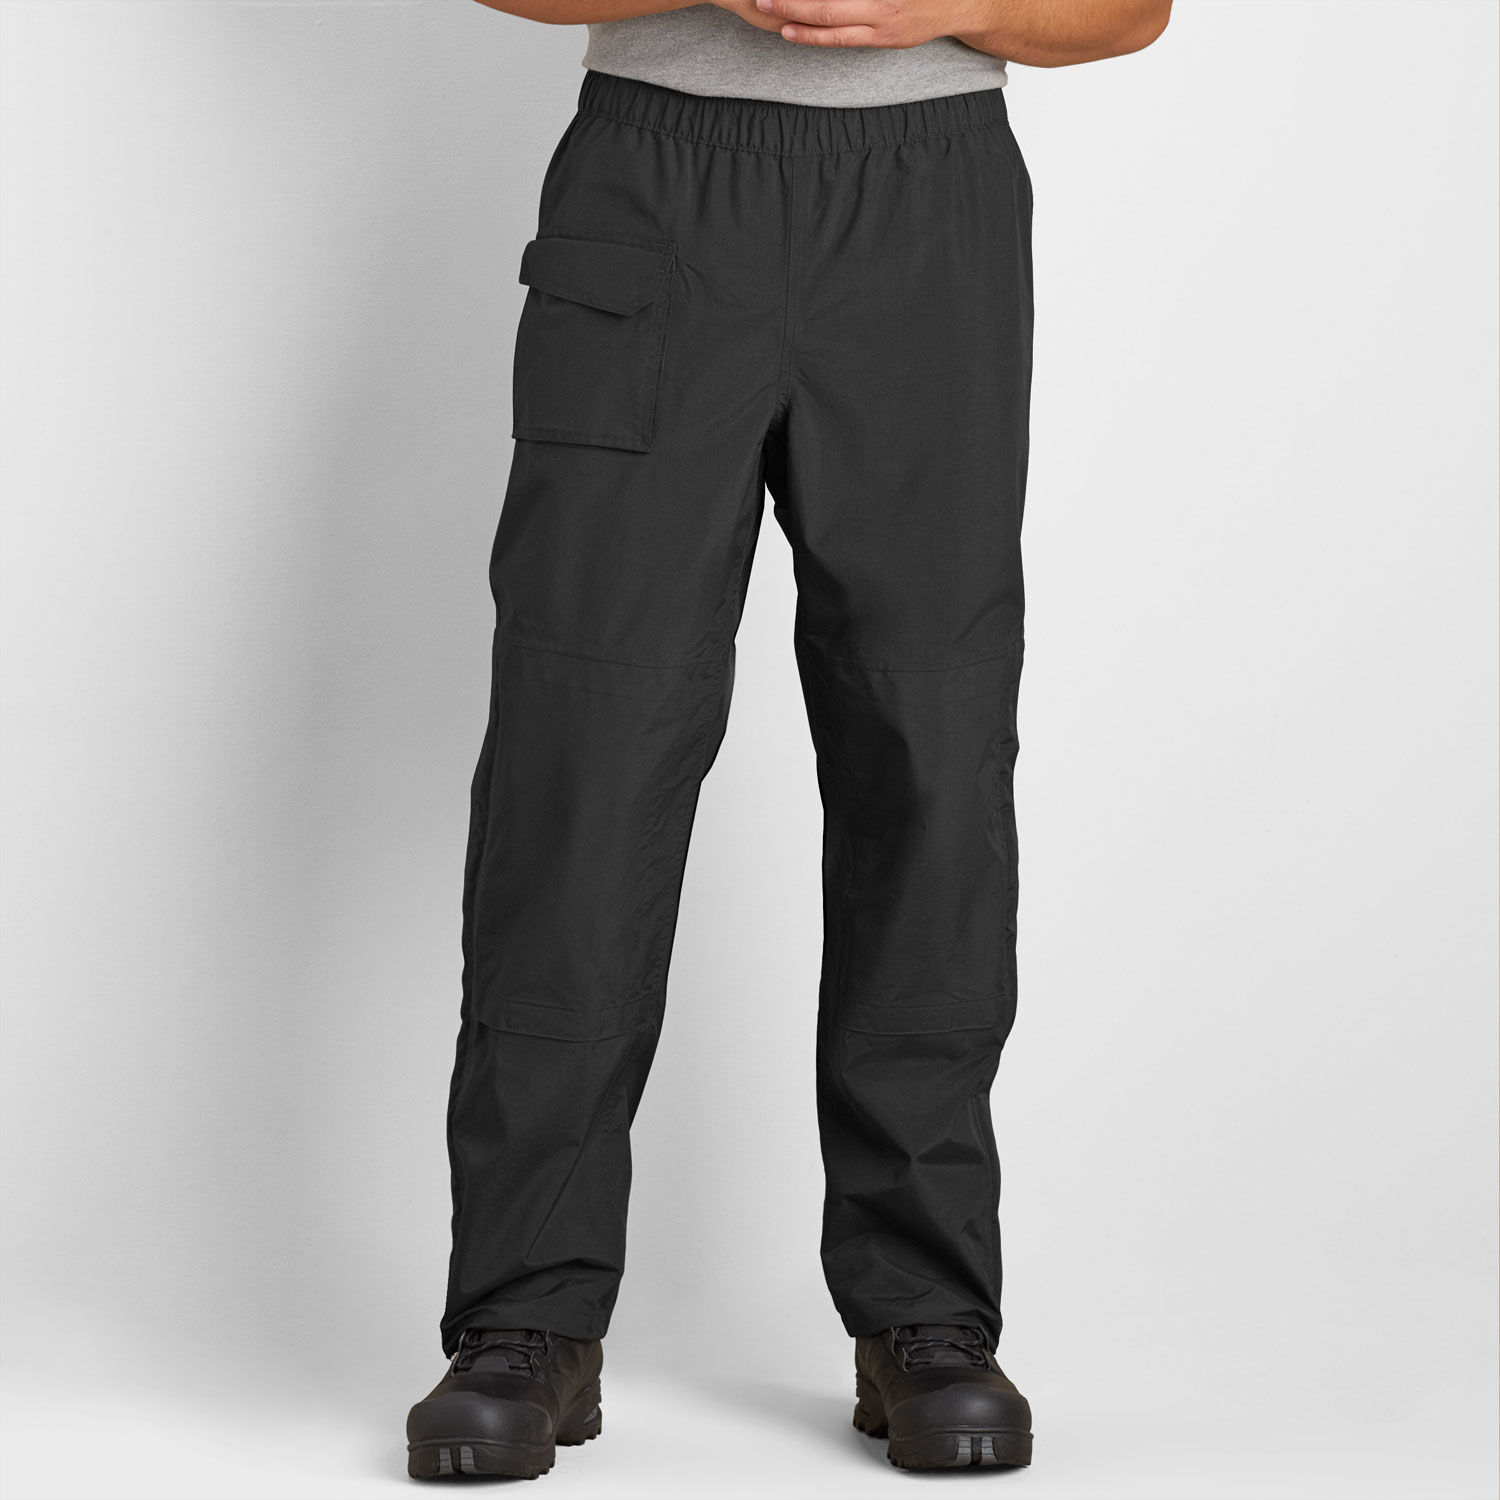 Carhartt Mid-Rise Loose Fit Rain Pants at Tractor Supply Co.